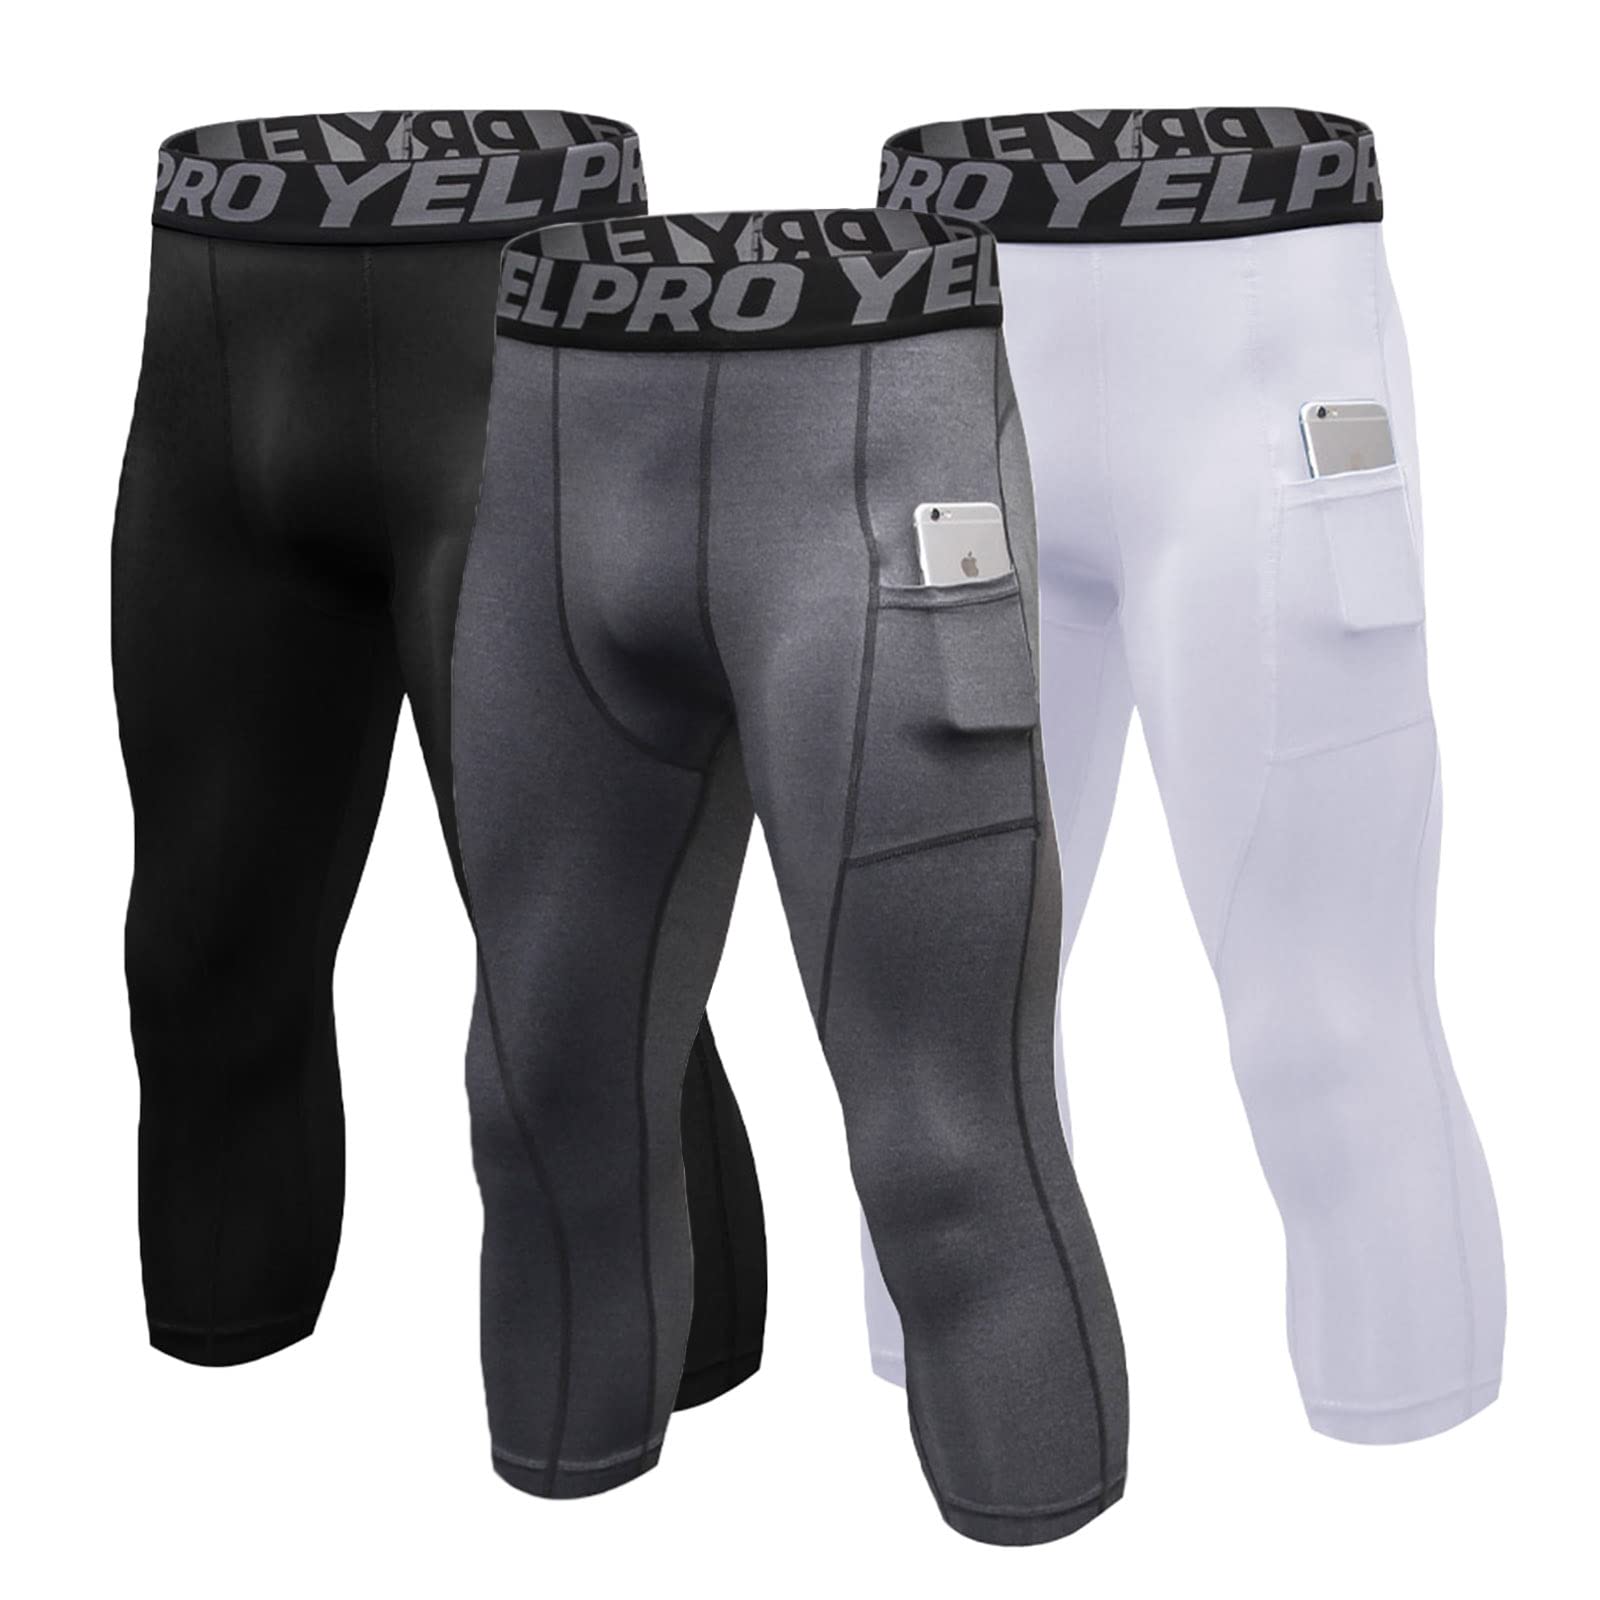  3 Pack Mens 3/4 Compression Pants, Dry Fit Men Running Leggings  3/4 Tights Workout Gym Capri Pant Football Basketball